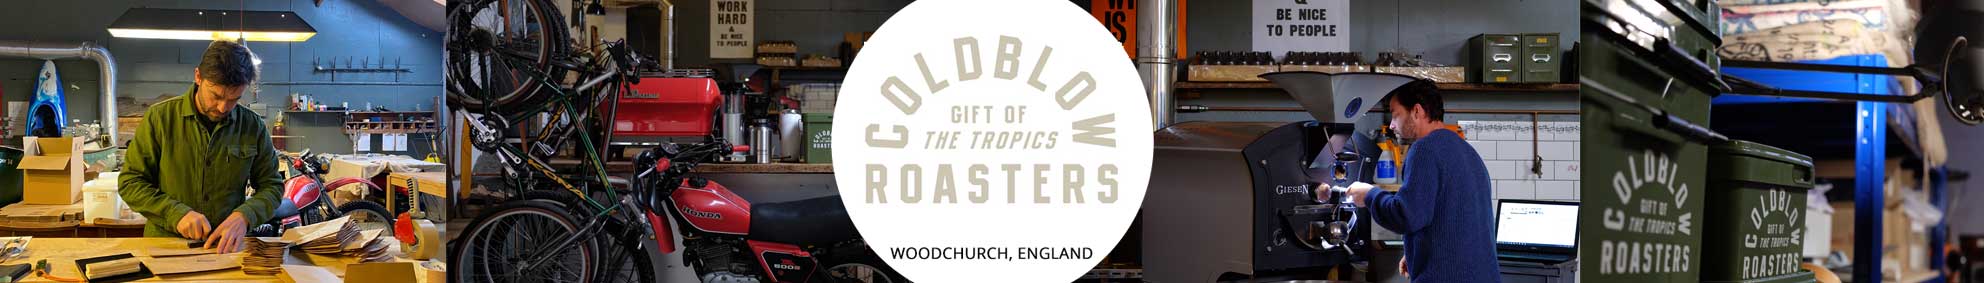 cold blow coffee roasters on uk best coffee subscription